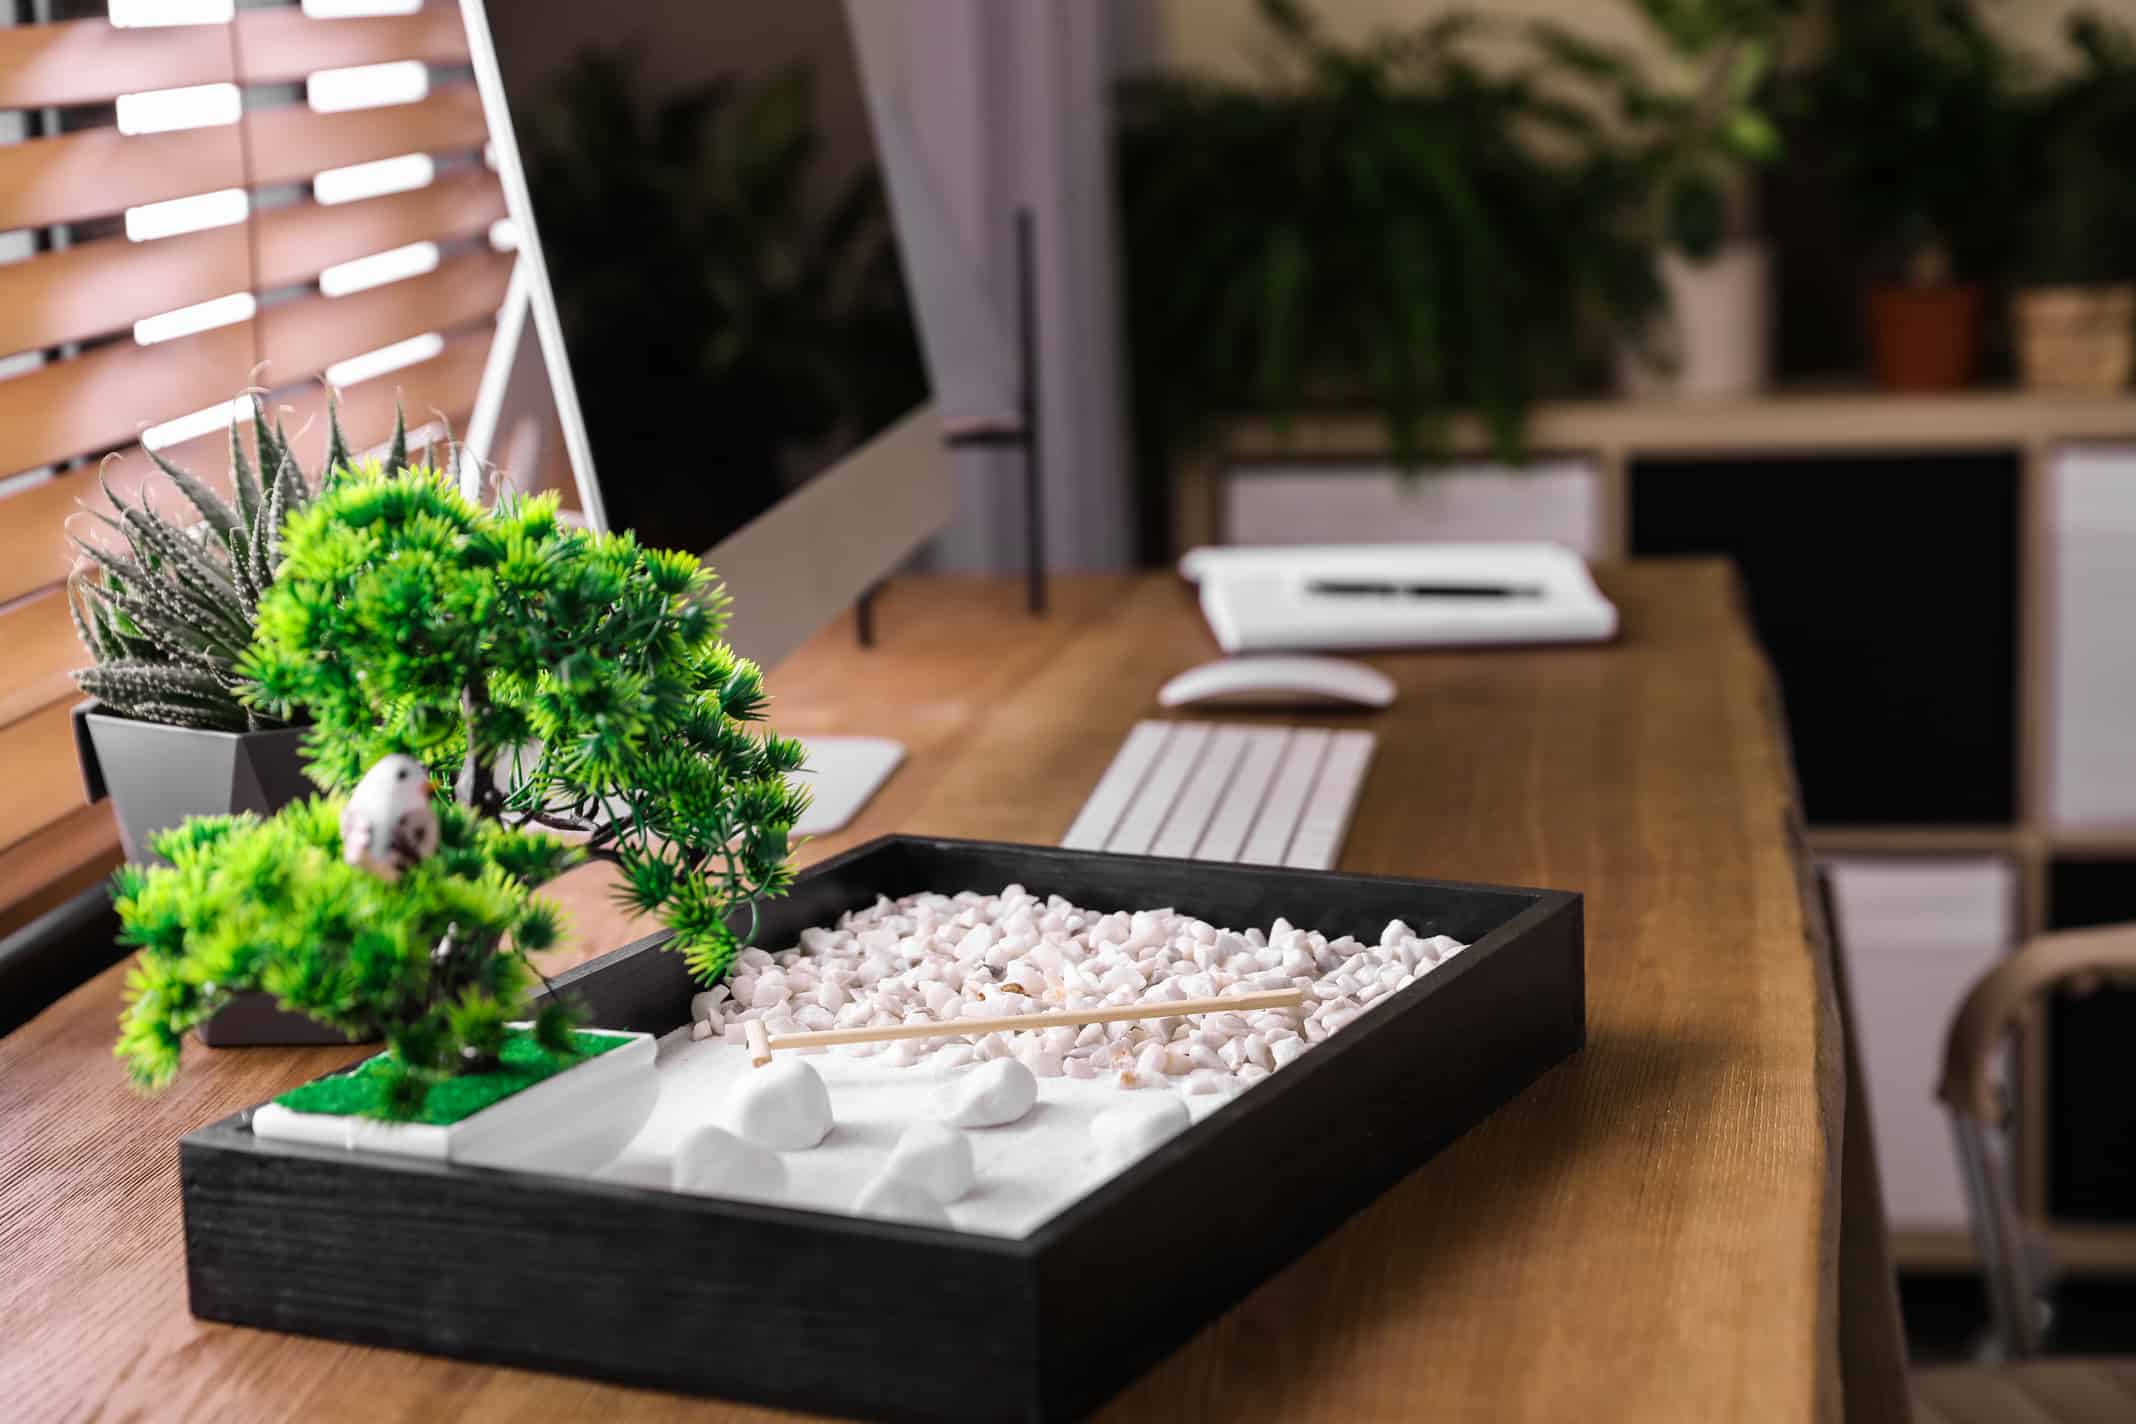 Modern workplace with beautiful miniature zen garden and computer in room